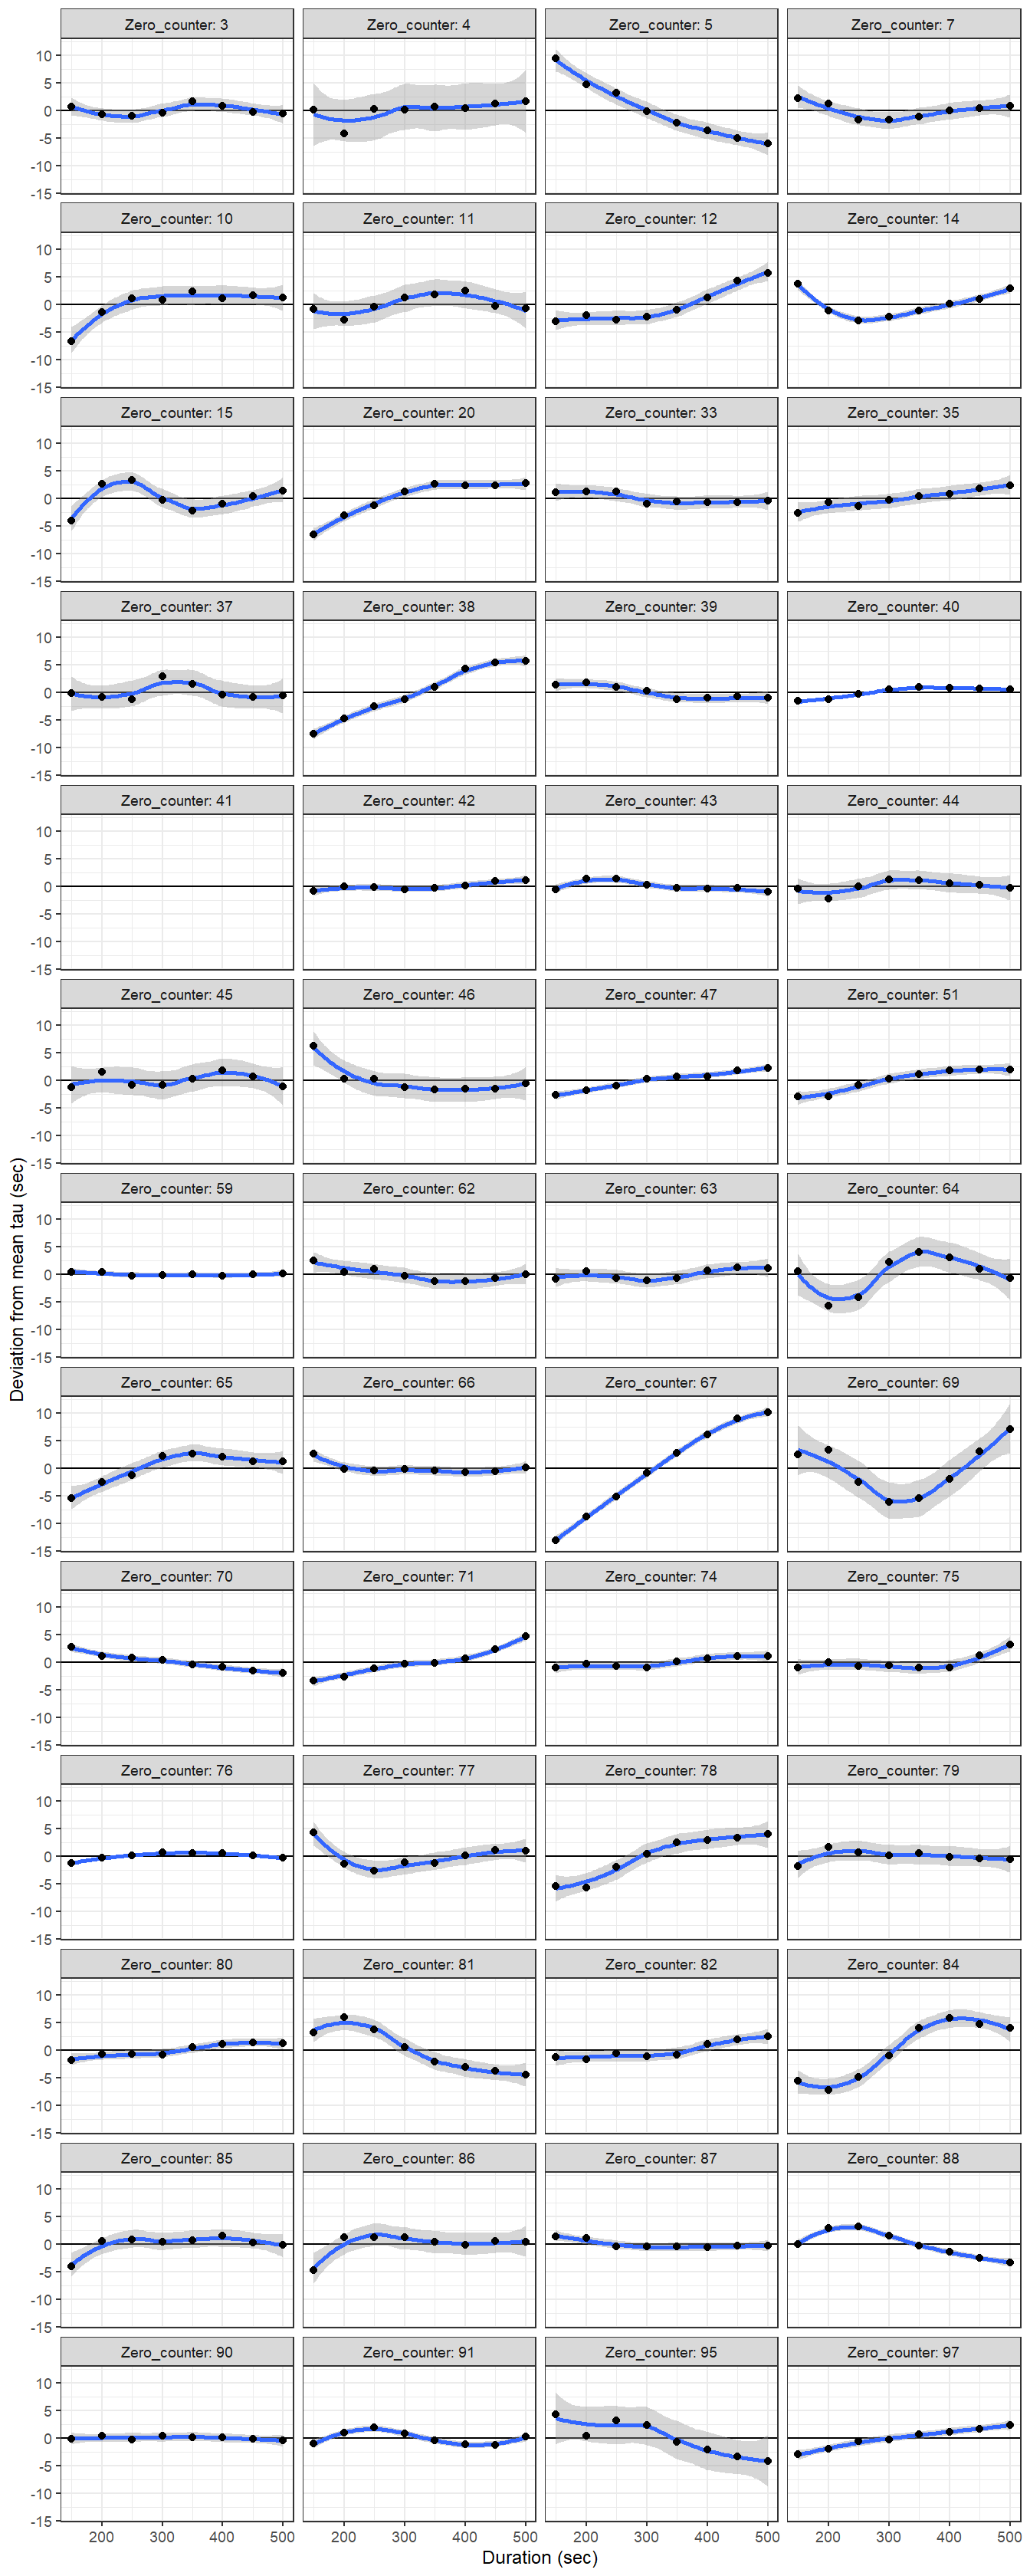 Determined tau values as a function of the fit interval duration, displayed individually for each flush period.